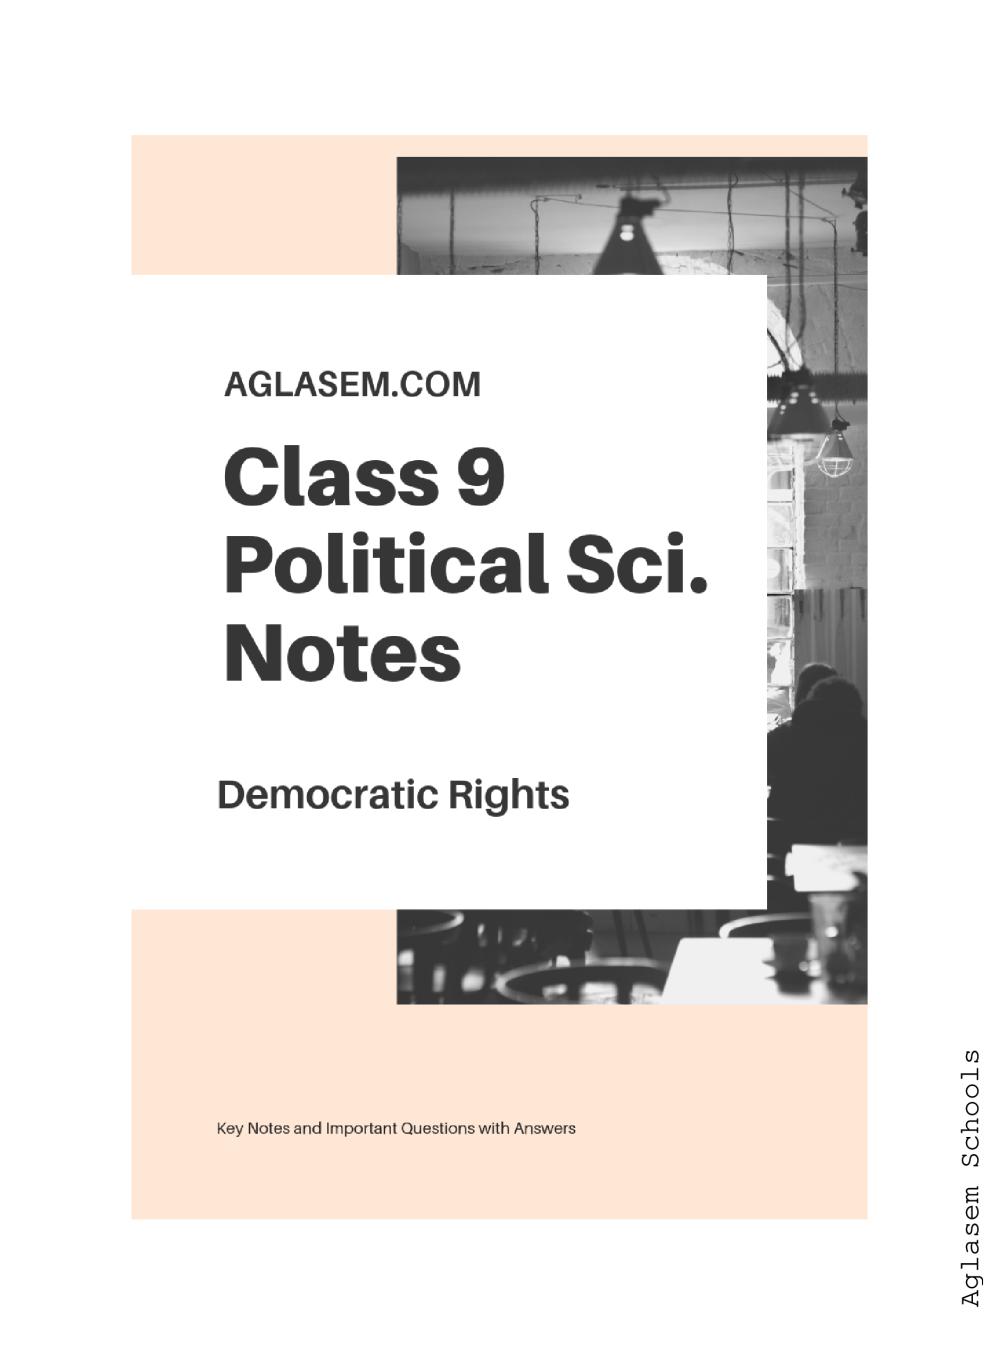 Class 9 Social Science Political Science Civics Notes For Democratic